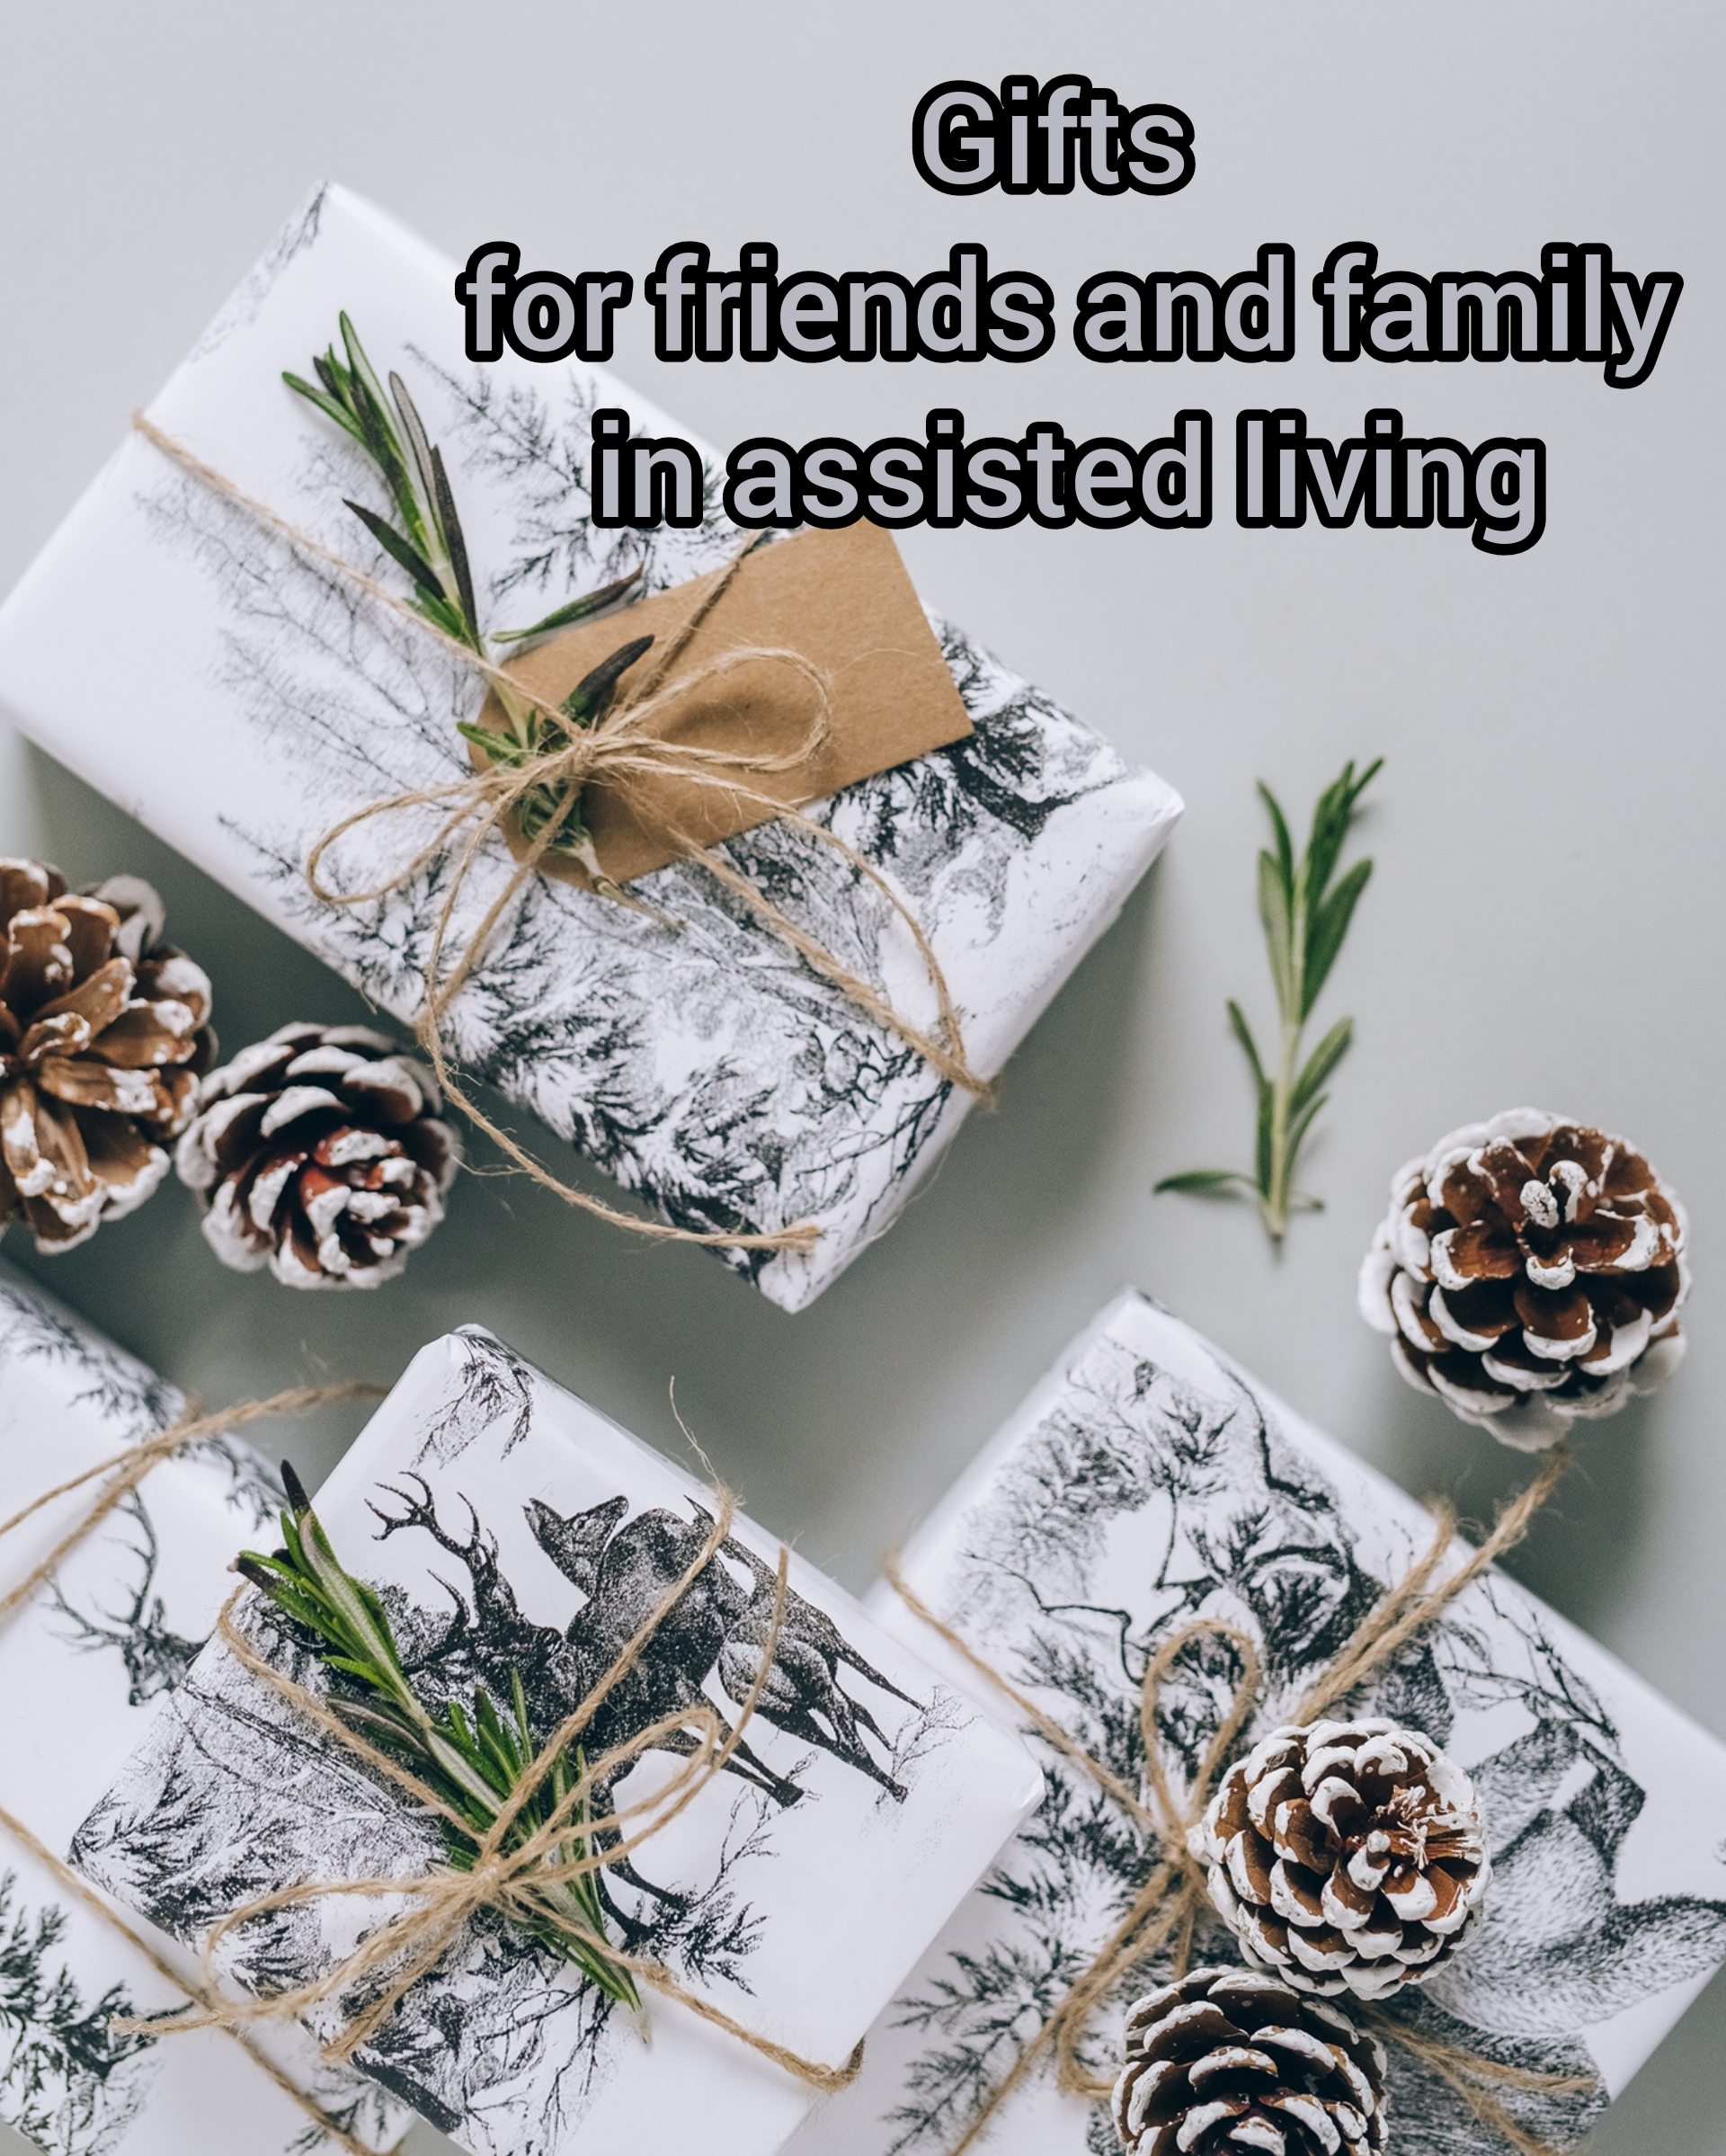 Gifts for people in assisted living